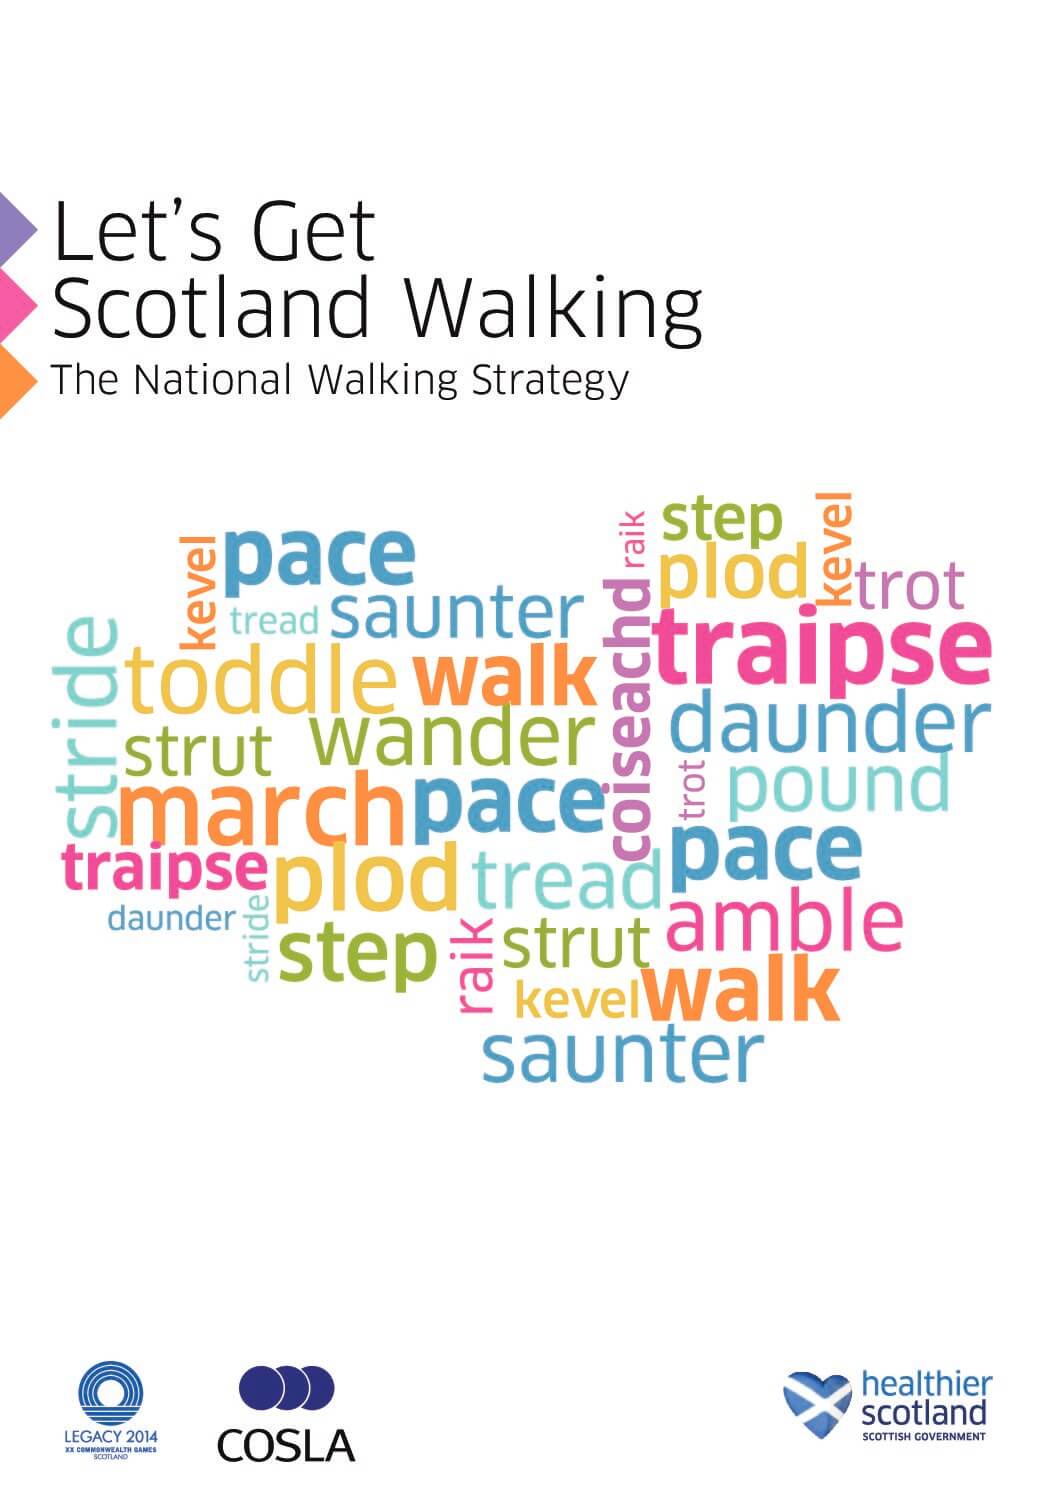 Let’s Get Scotland Walking – The National Walking Strategy